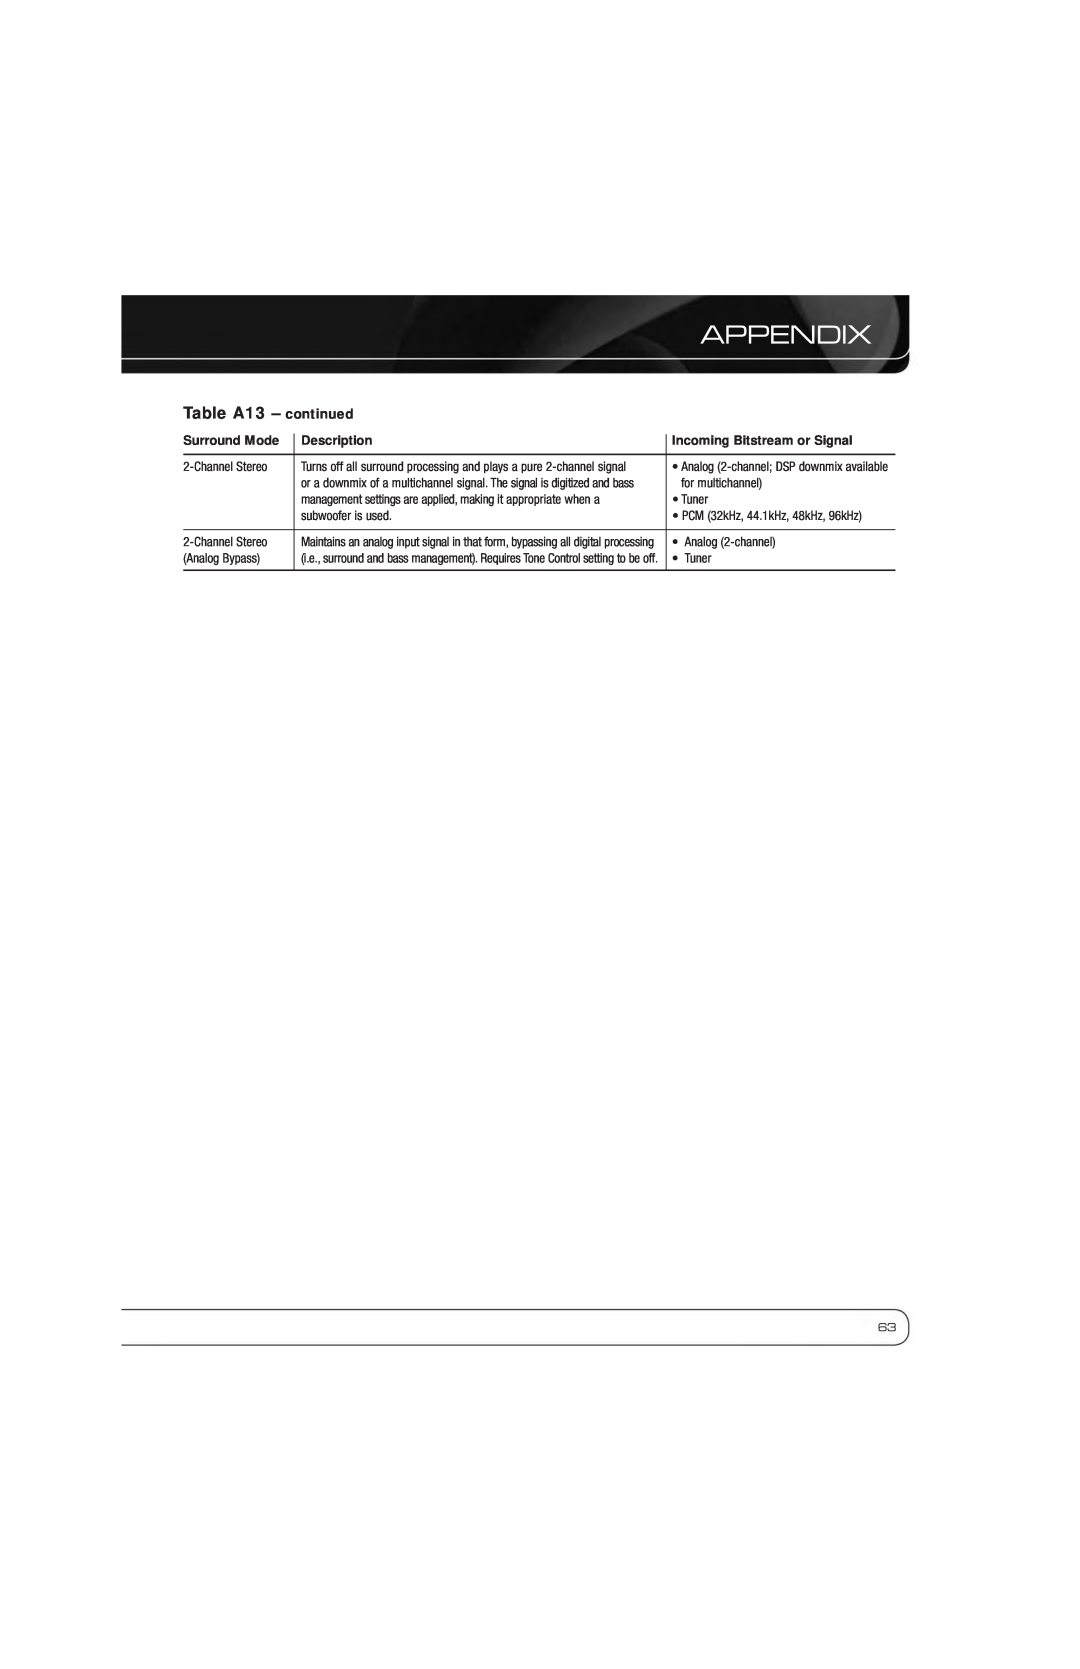 Harman-Kardon AVR 7550HD owner manual Appendix, Table A13 - continued, ChannelStereo 